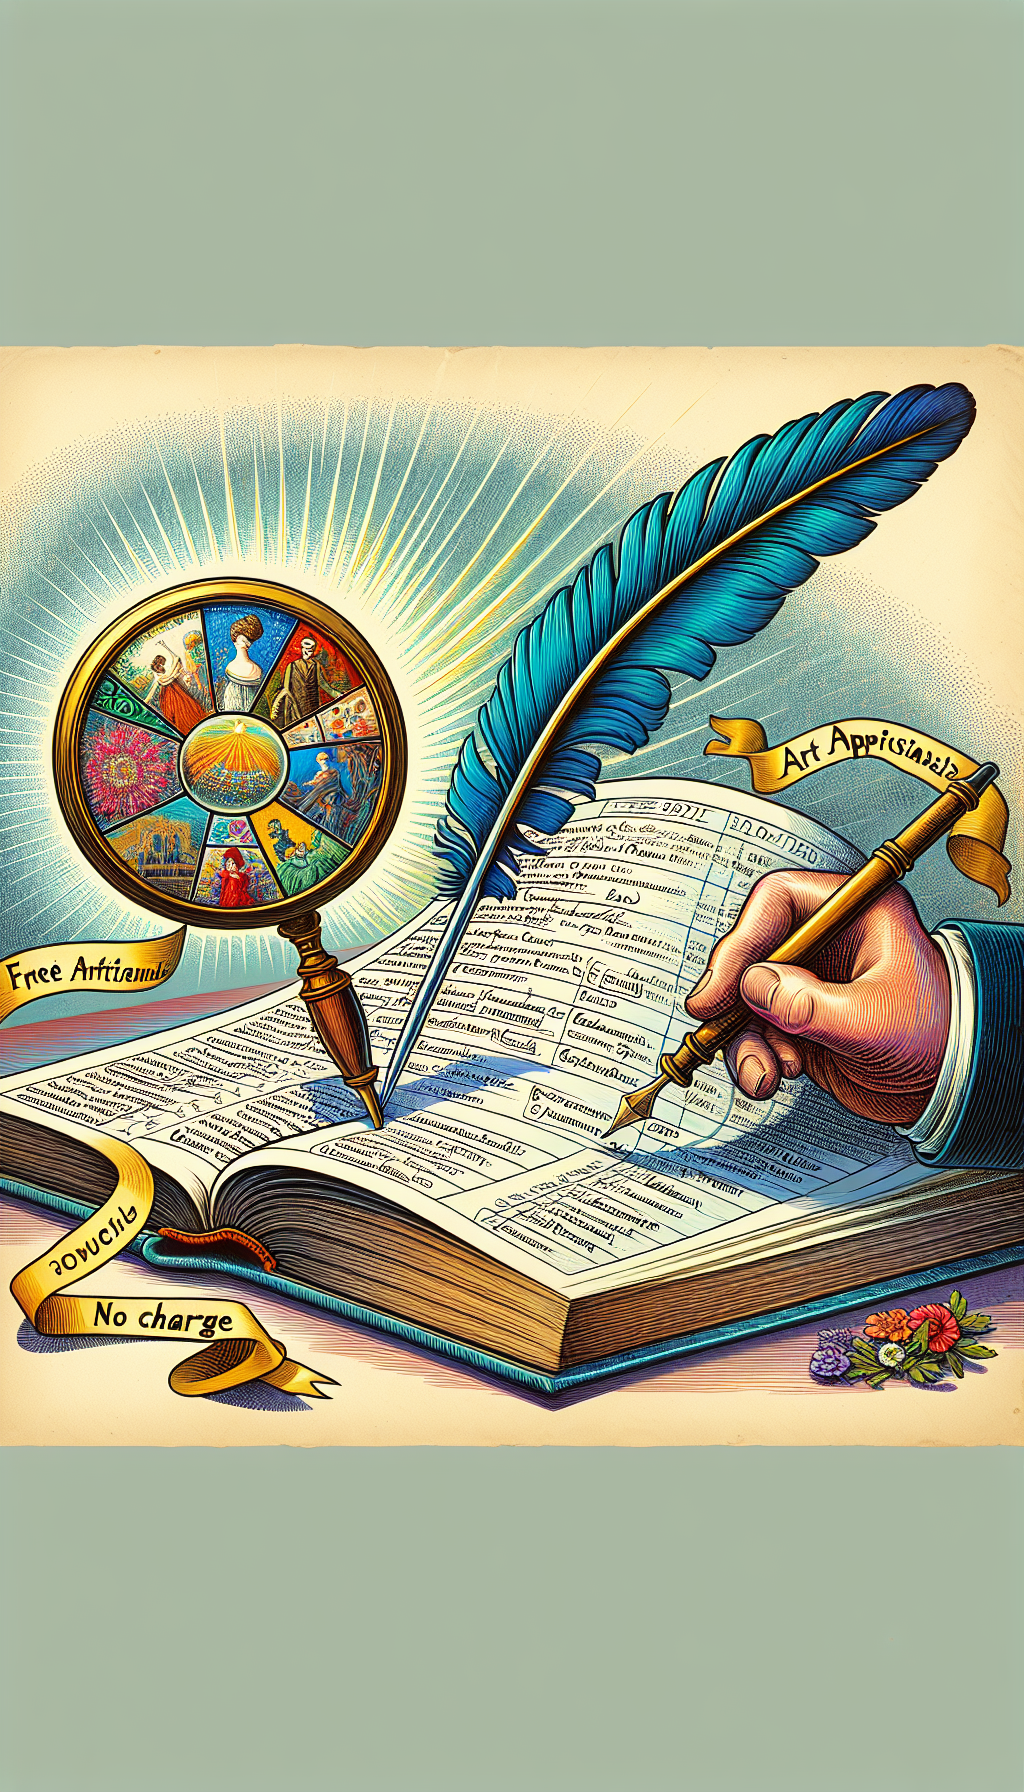 An illustration of a whimsical, oversized quill pen inscribing detailed information into a giant open ledger, with a magnifying glass hovering above that reflects a vibrant tapestry of artwork. A ribbon banner emblazoned with "Free Art Appraisal" curves around the scene, suggesting no cost for this valuable service. The styles within the magnifying glass shift from impressionist to cubist, highlighting diverse art forms being chronic.